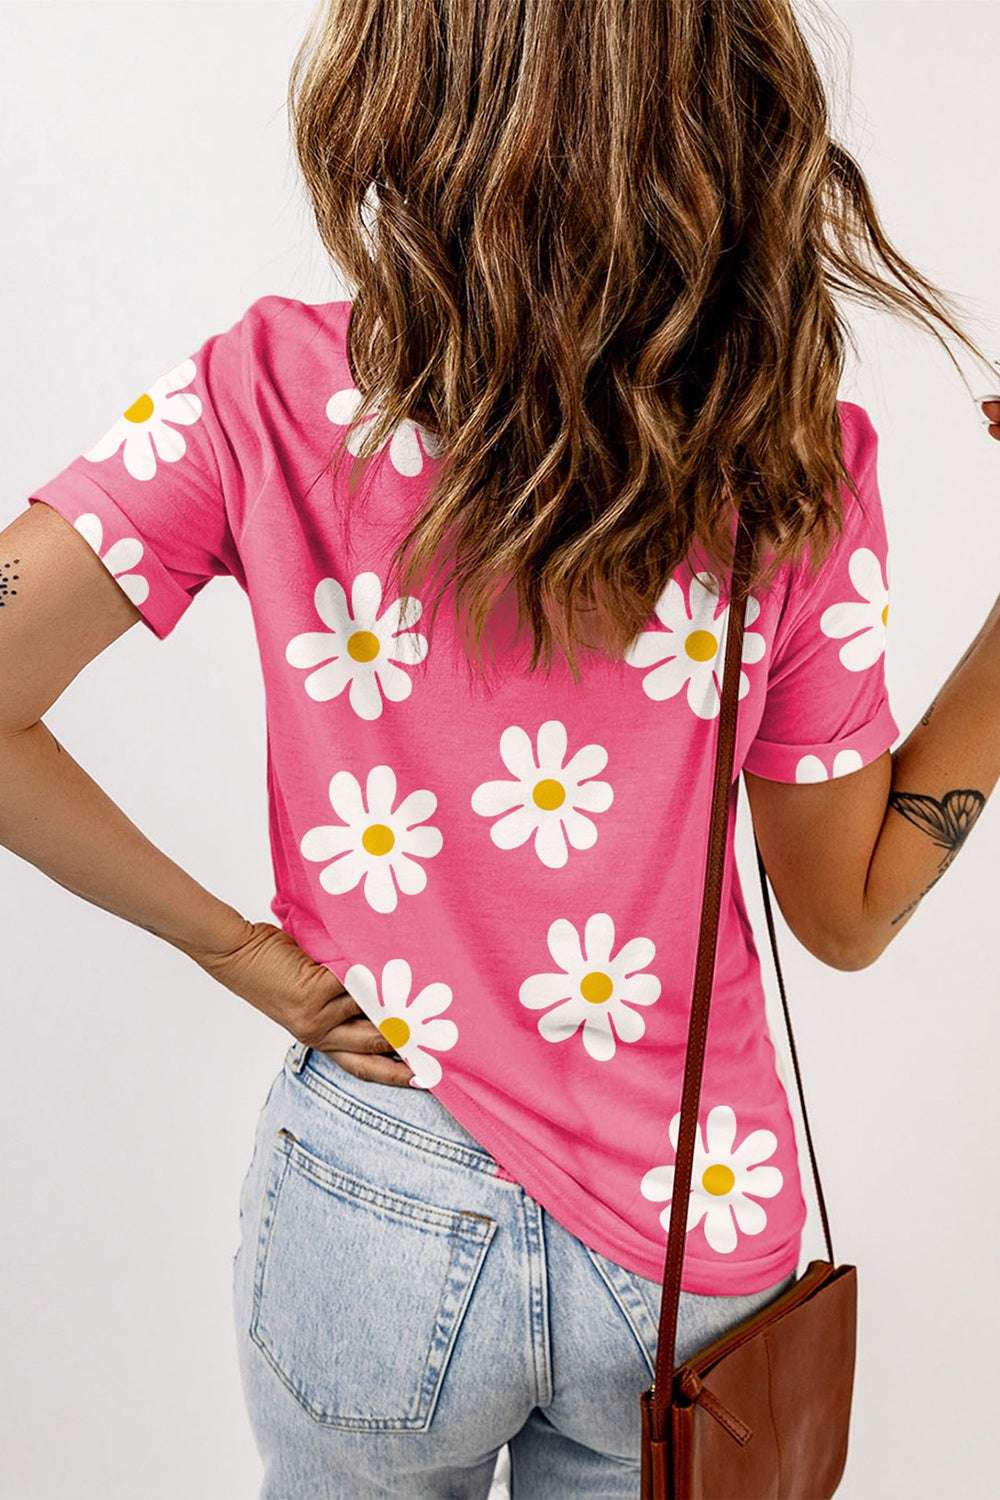 PINK DAISY FLOWER PRINTED TSHIRT Blouse Meadeux